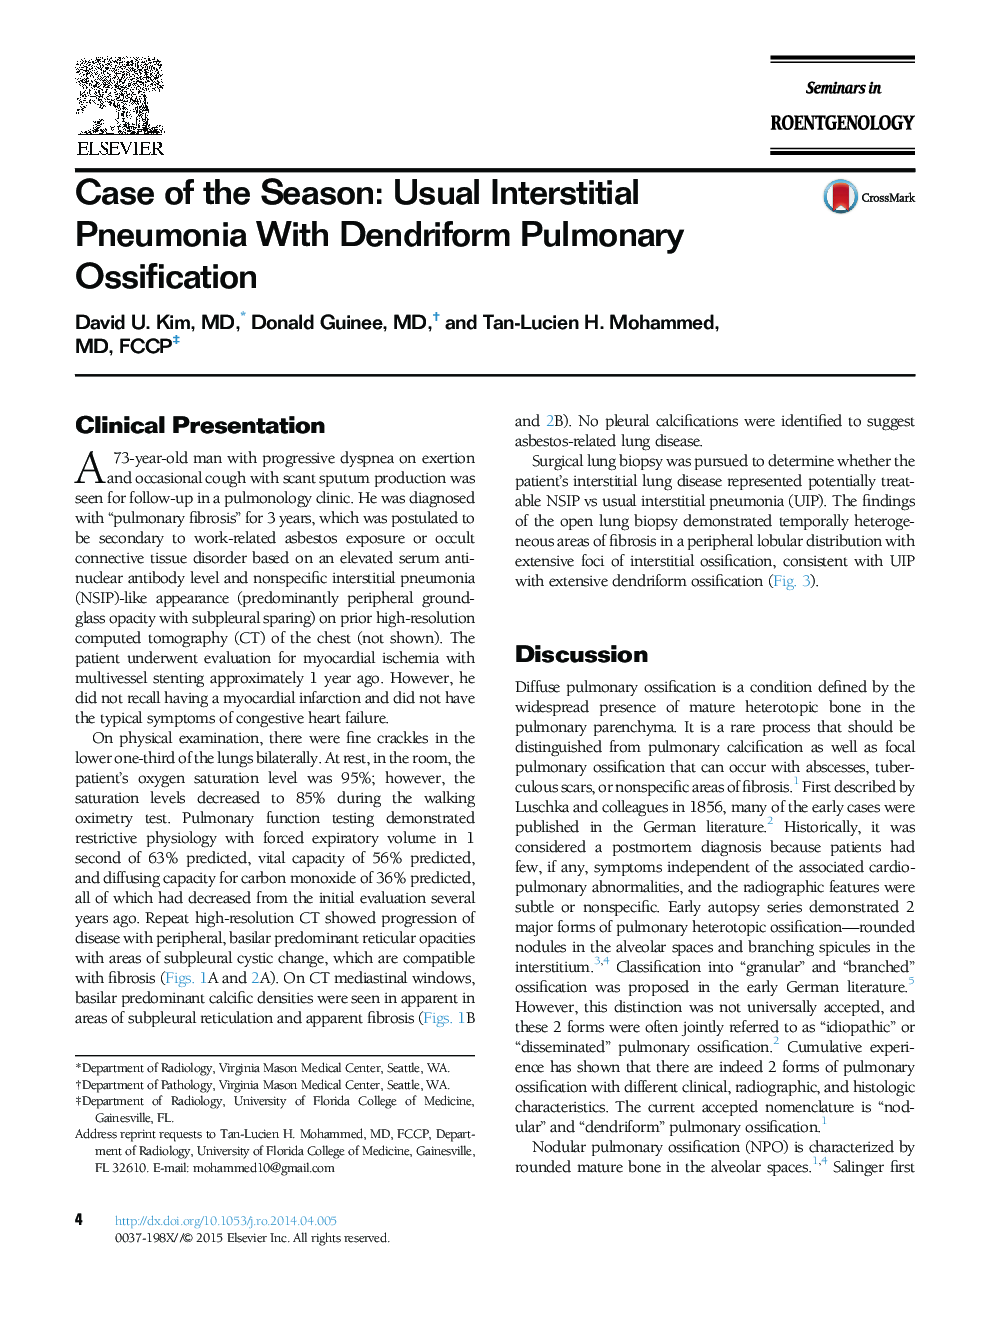 Case of the Season: Usual Interstitial Pneumonia With Dendriform Pulmonary Ossification